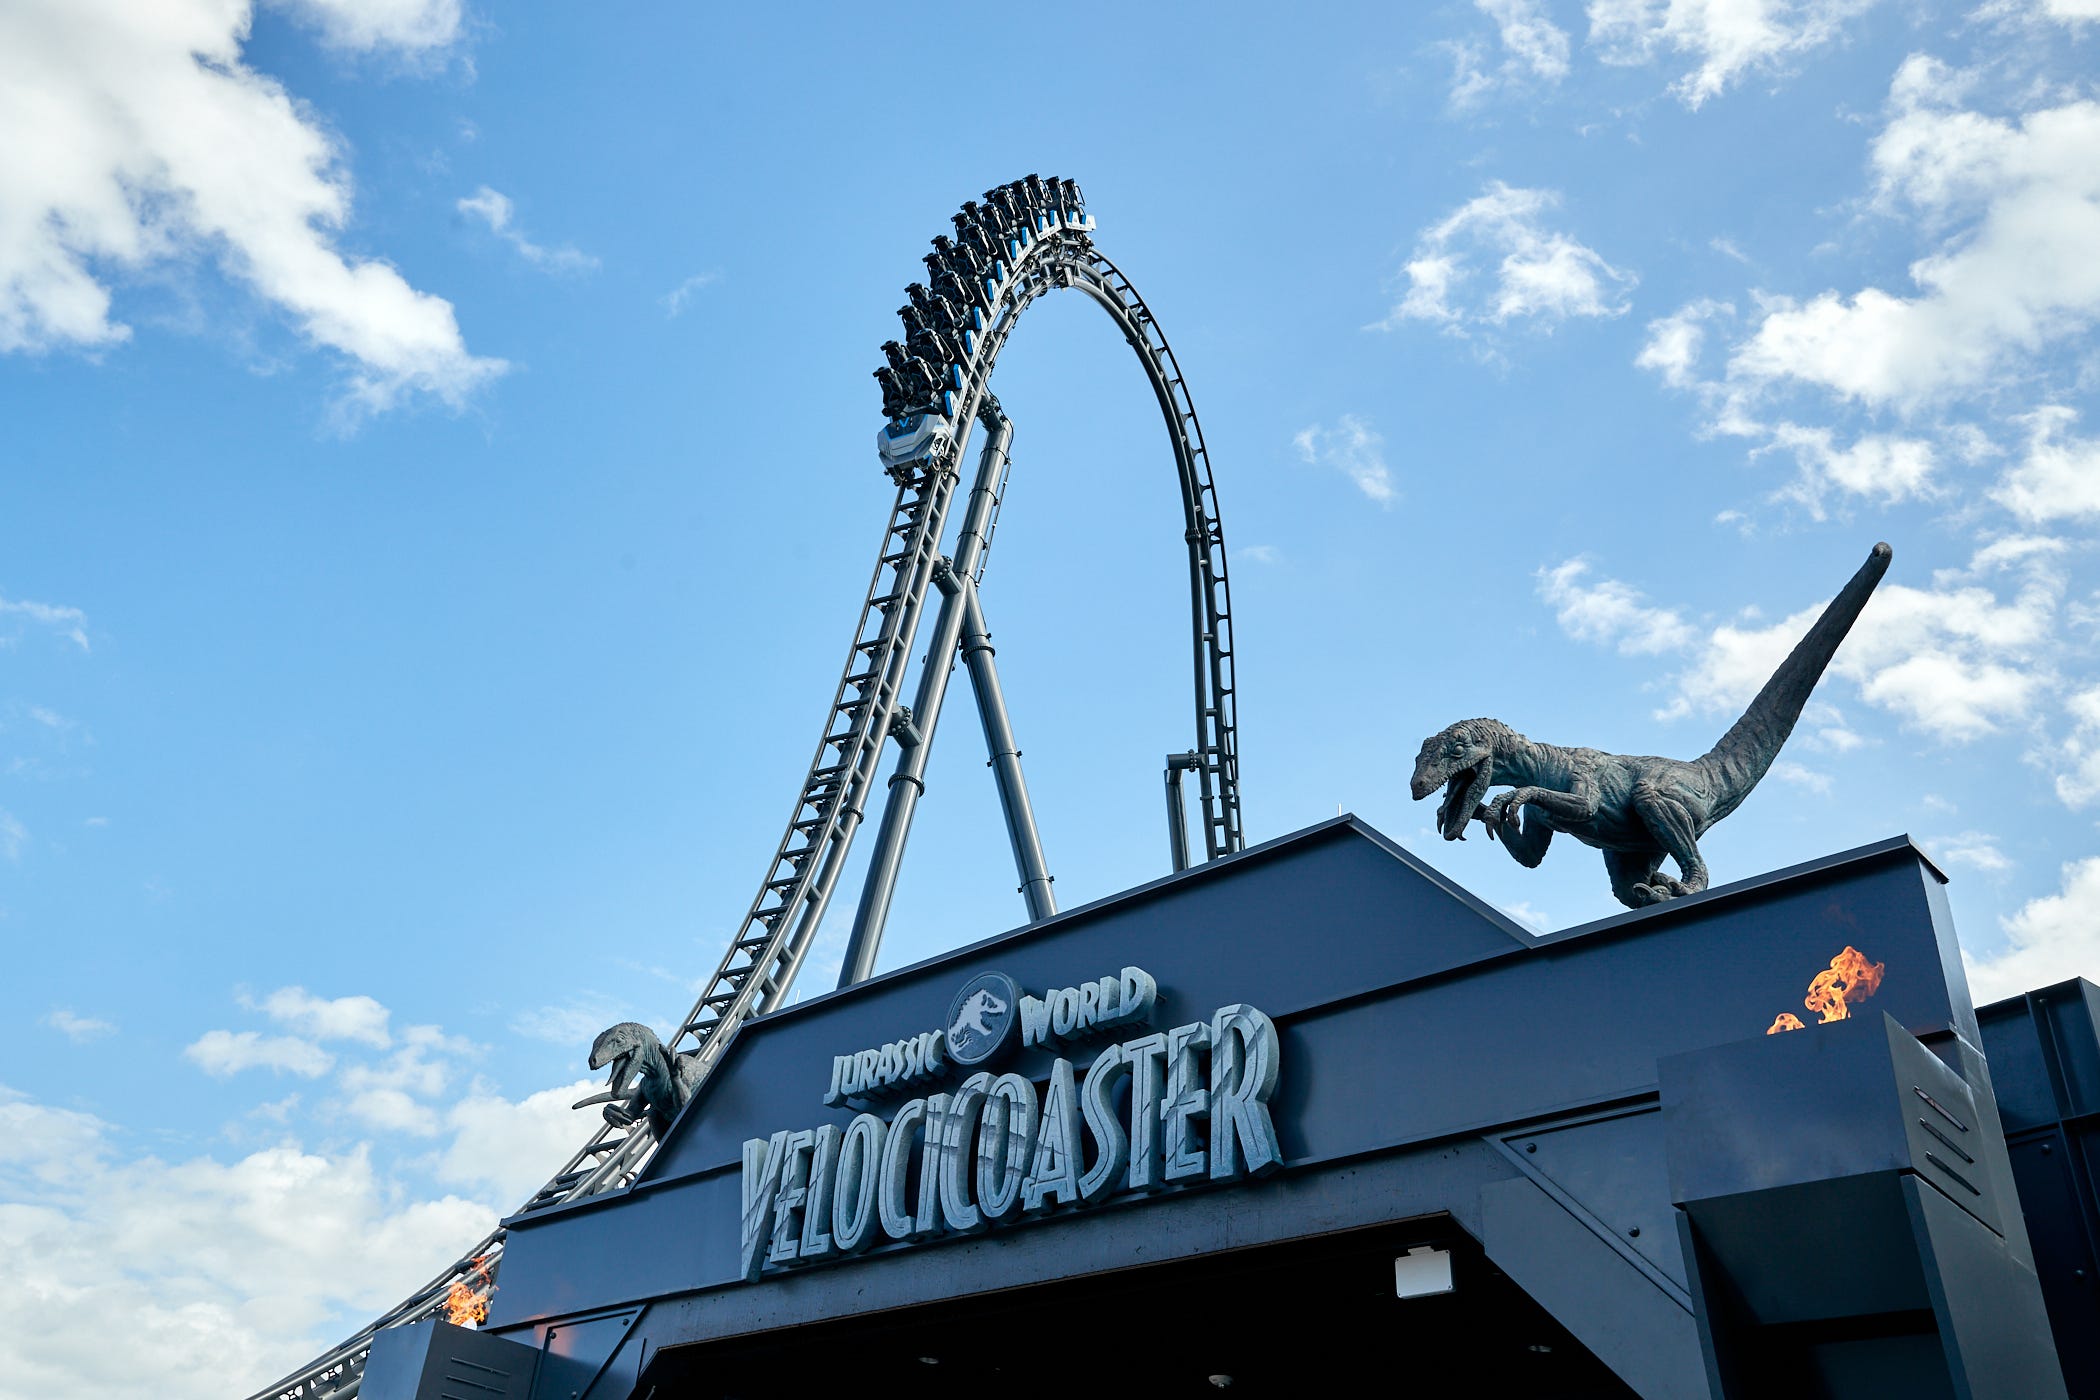 Velocicoaster Universal 6 Things To Know About The New Orlando Ride